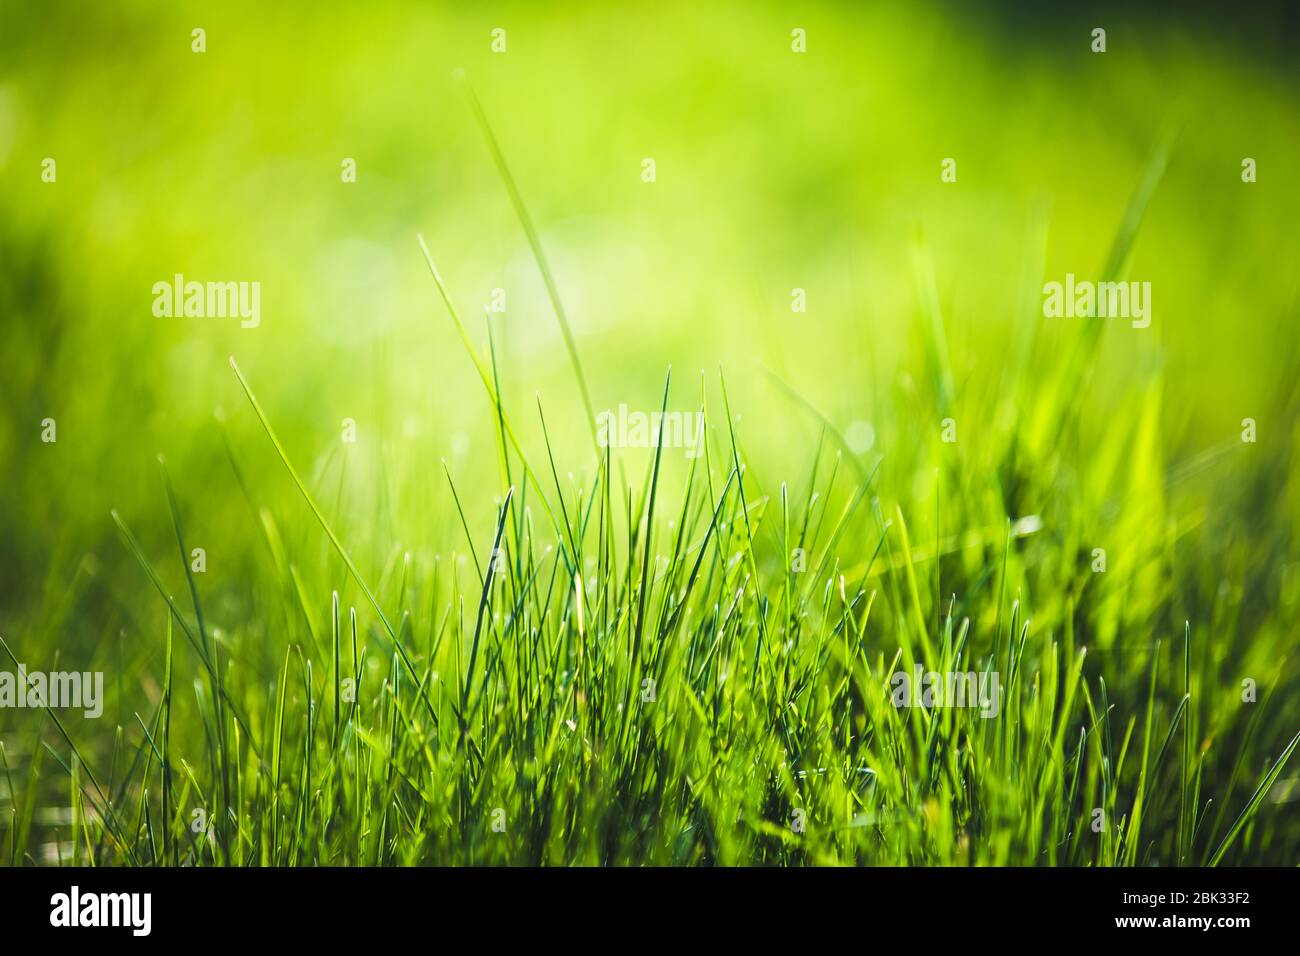 Fresh green grass abstract background Stock Photo